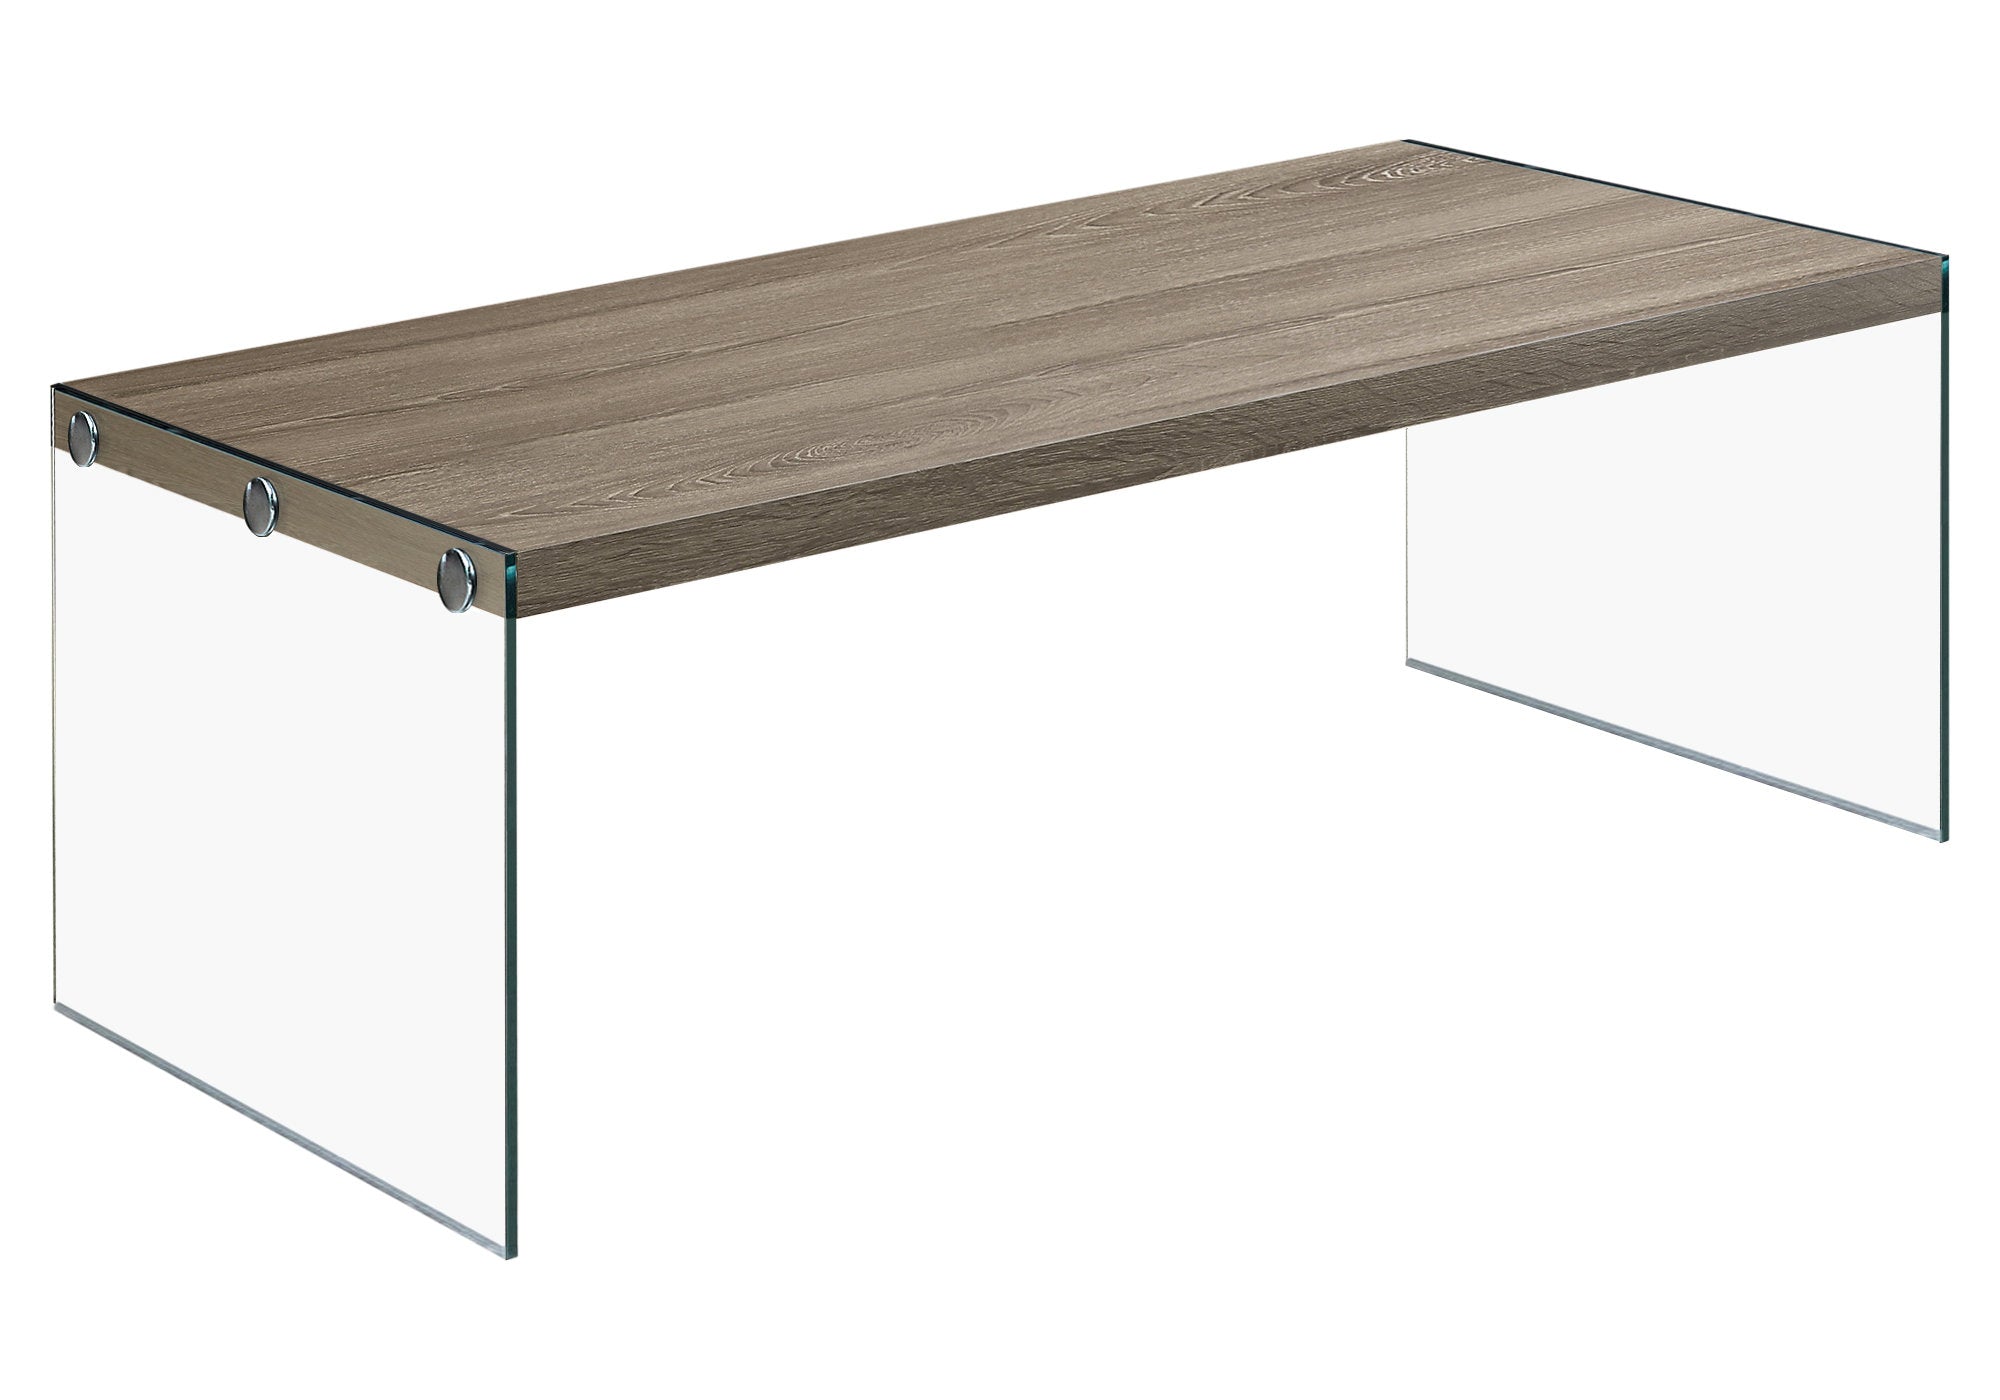 MN-943054    Coffee Table, Accent, Cocktail, Rectangular, Living Room, Tempered Glass, Laminate, Dark Taupe, Clear, Contemporary, Modern